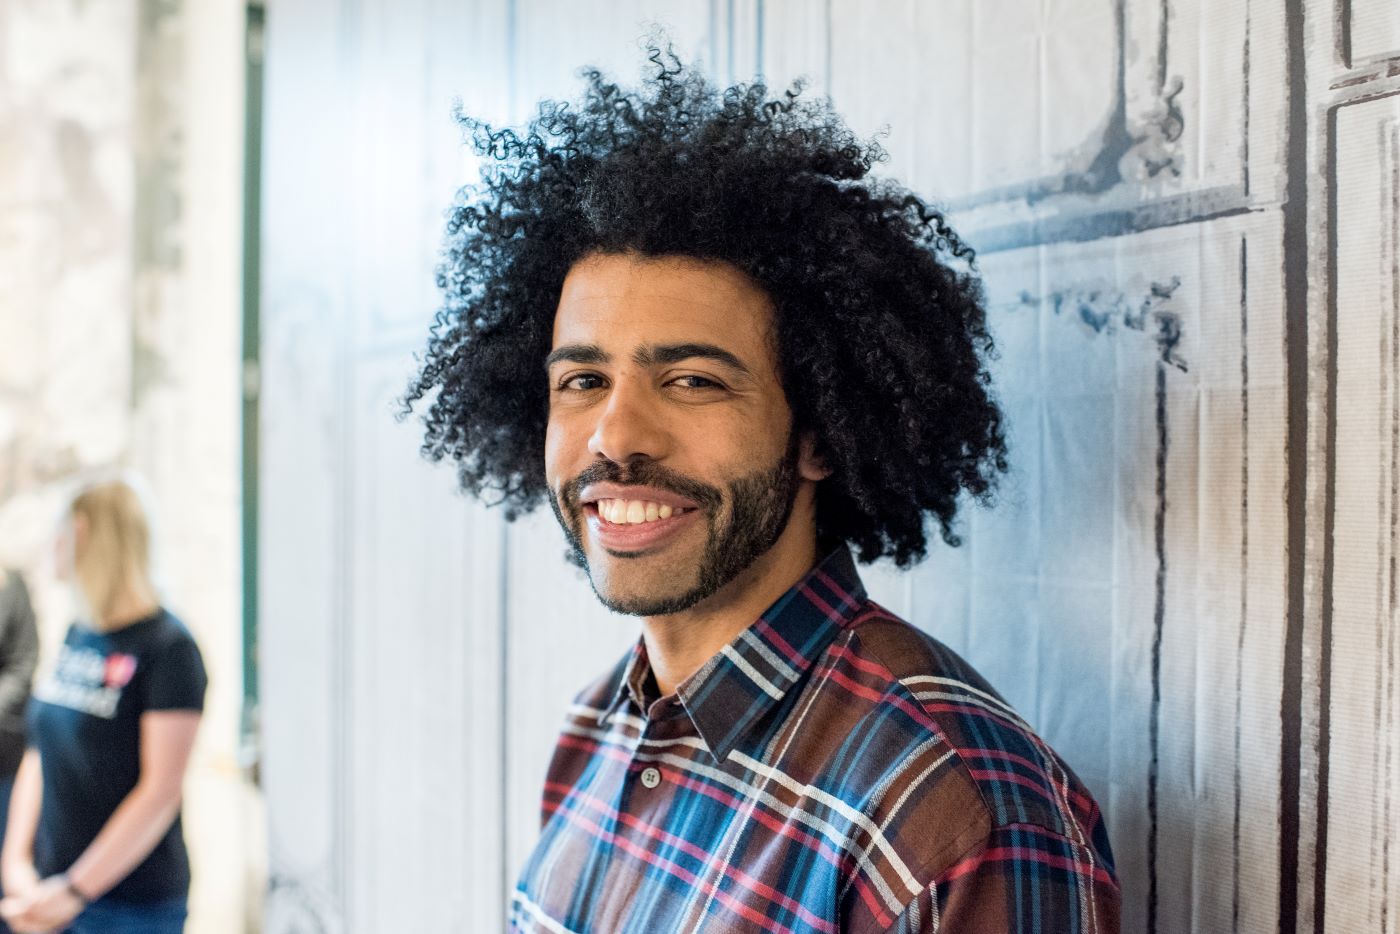 Daveed Diggs from 'Hamilton' wearing a blue, white, red, and brown shirt leaning against a light colored wall.